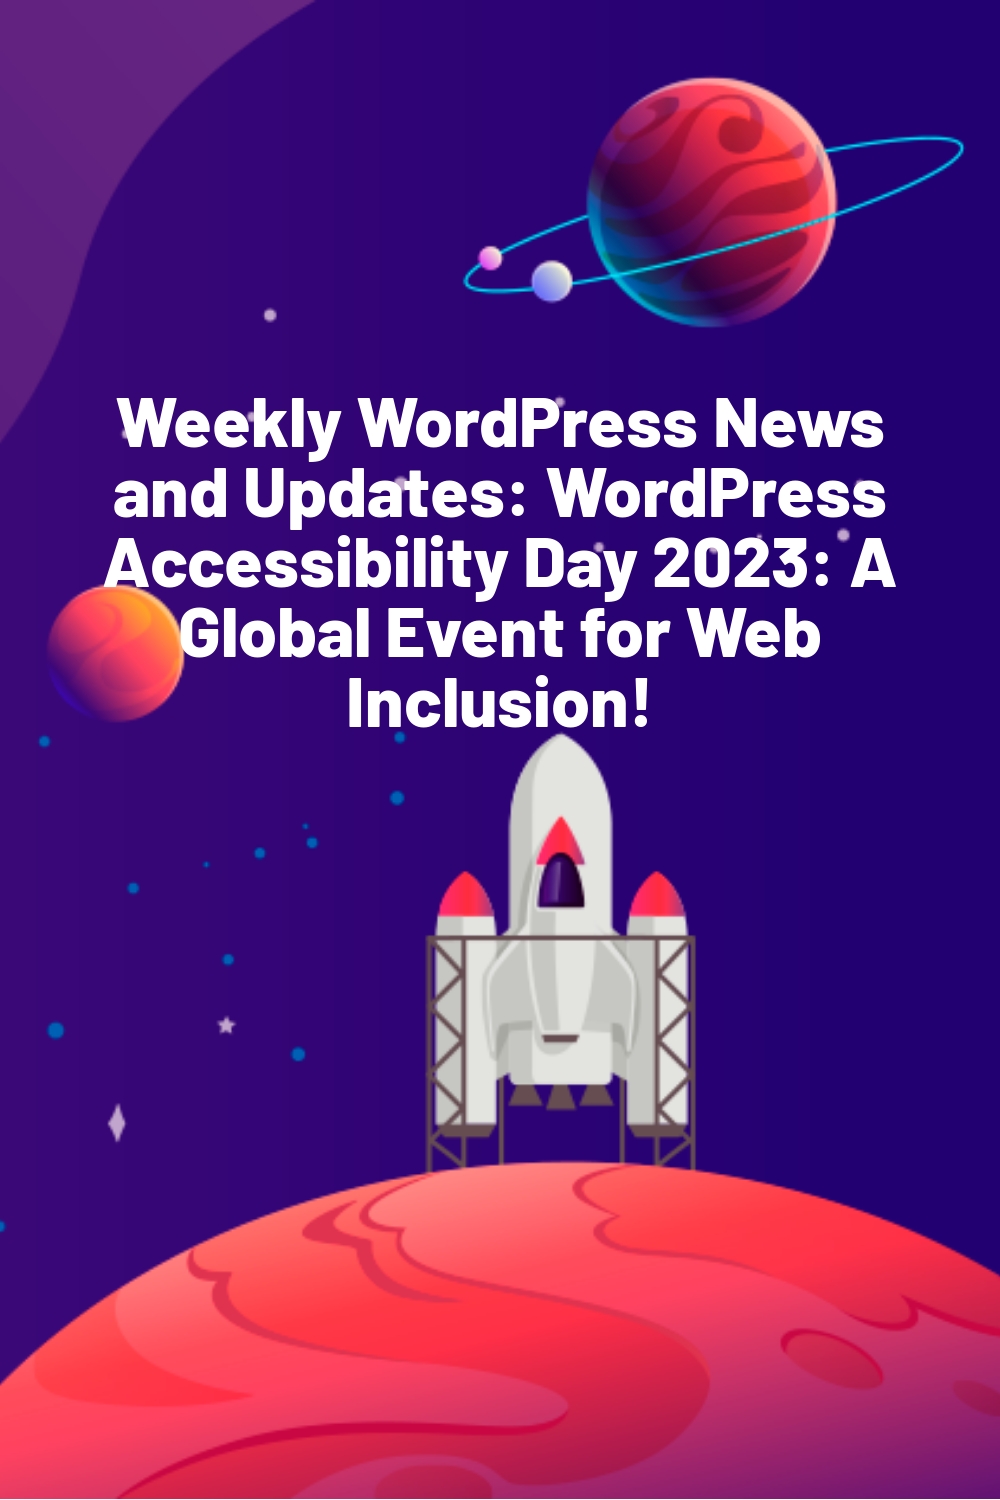 Weekly WordPress News and Updates: WordPress Accessibility Day 2023: A Global Event for Web Inclusion!